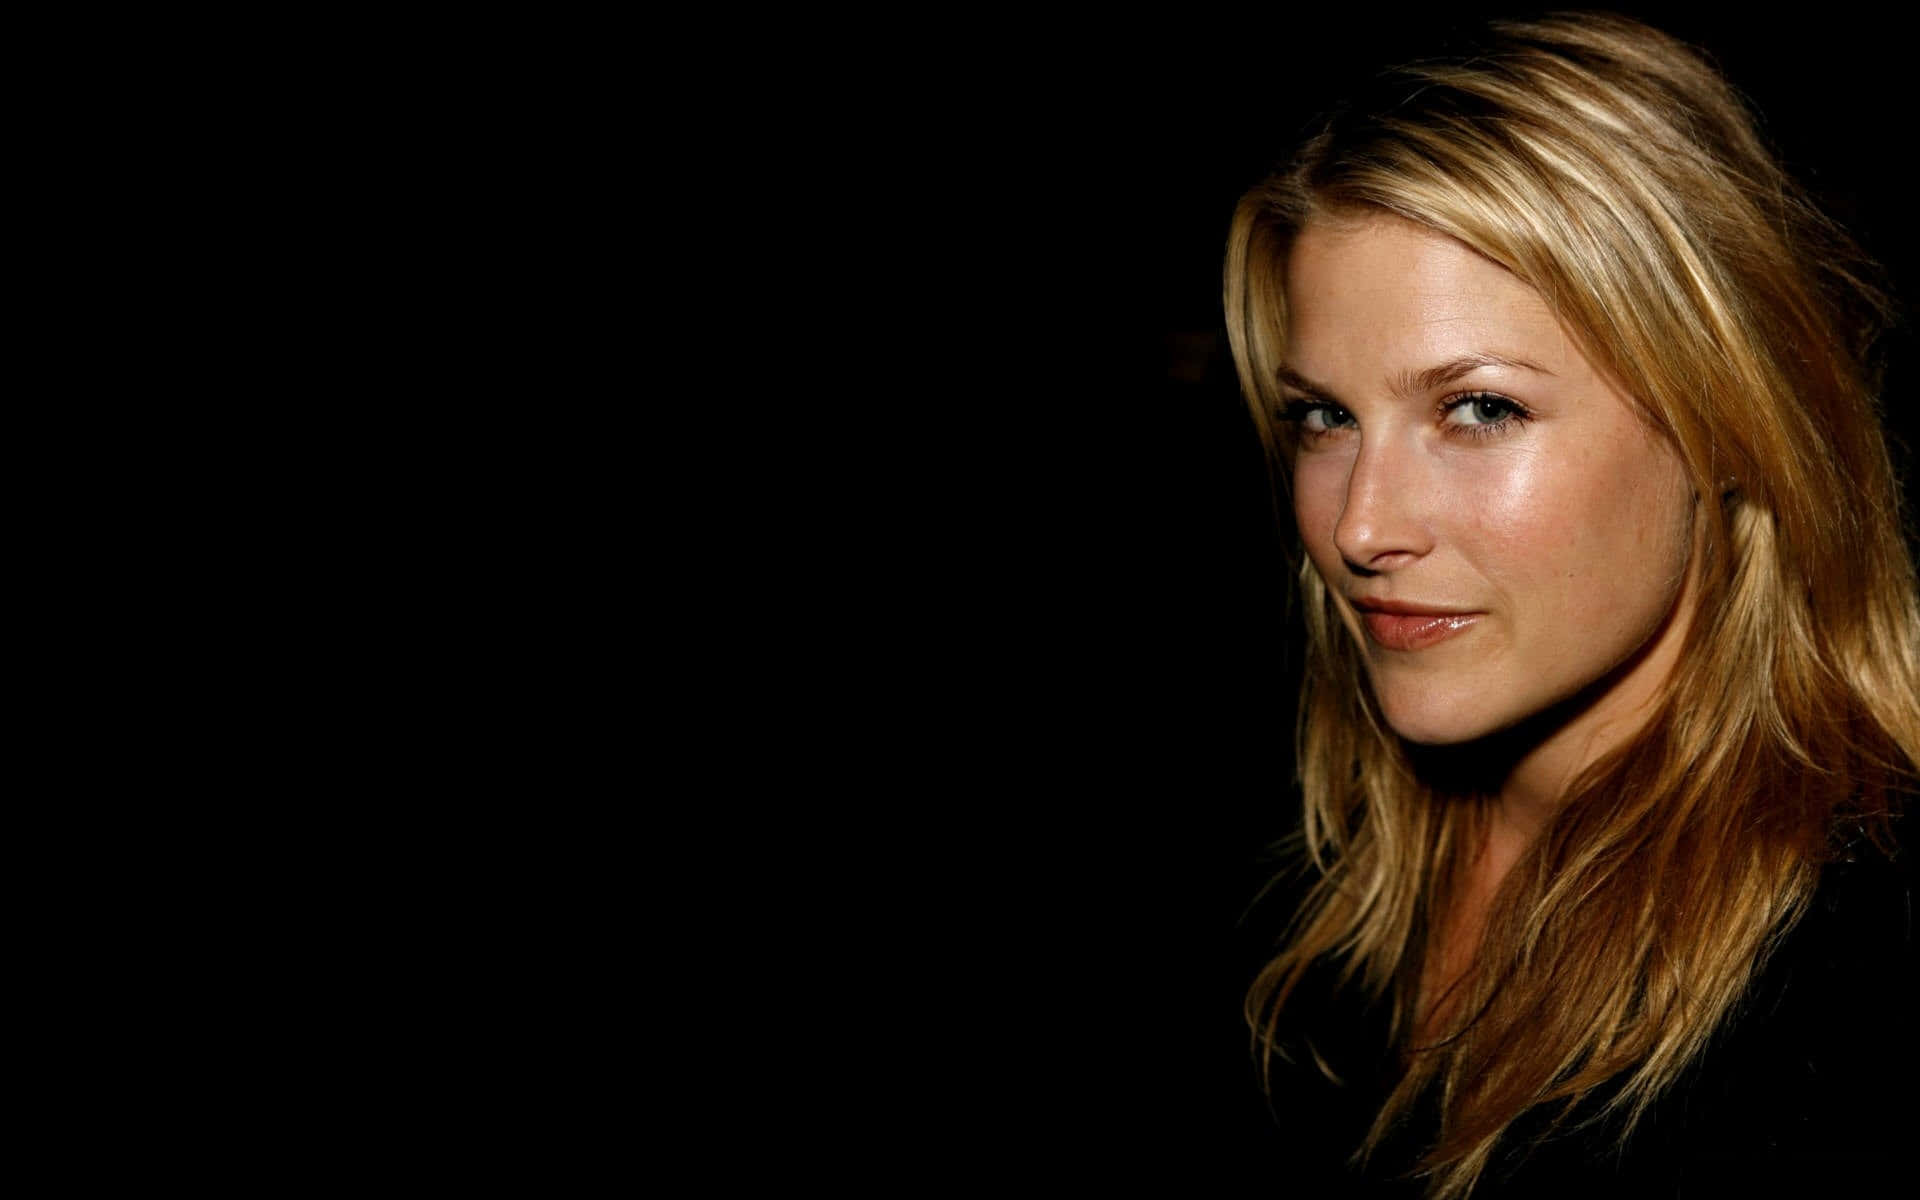 Actress Ali Larter Looking Beautiful At A Red-carpet Event Background